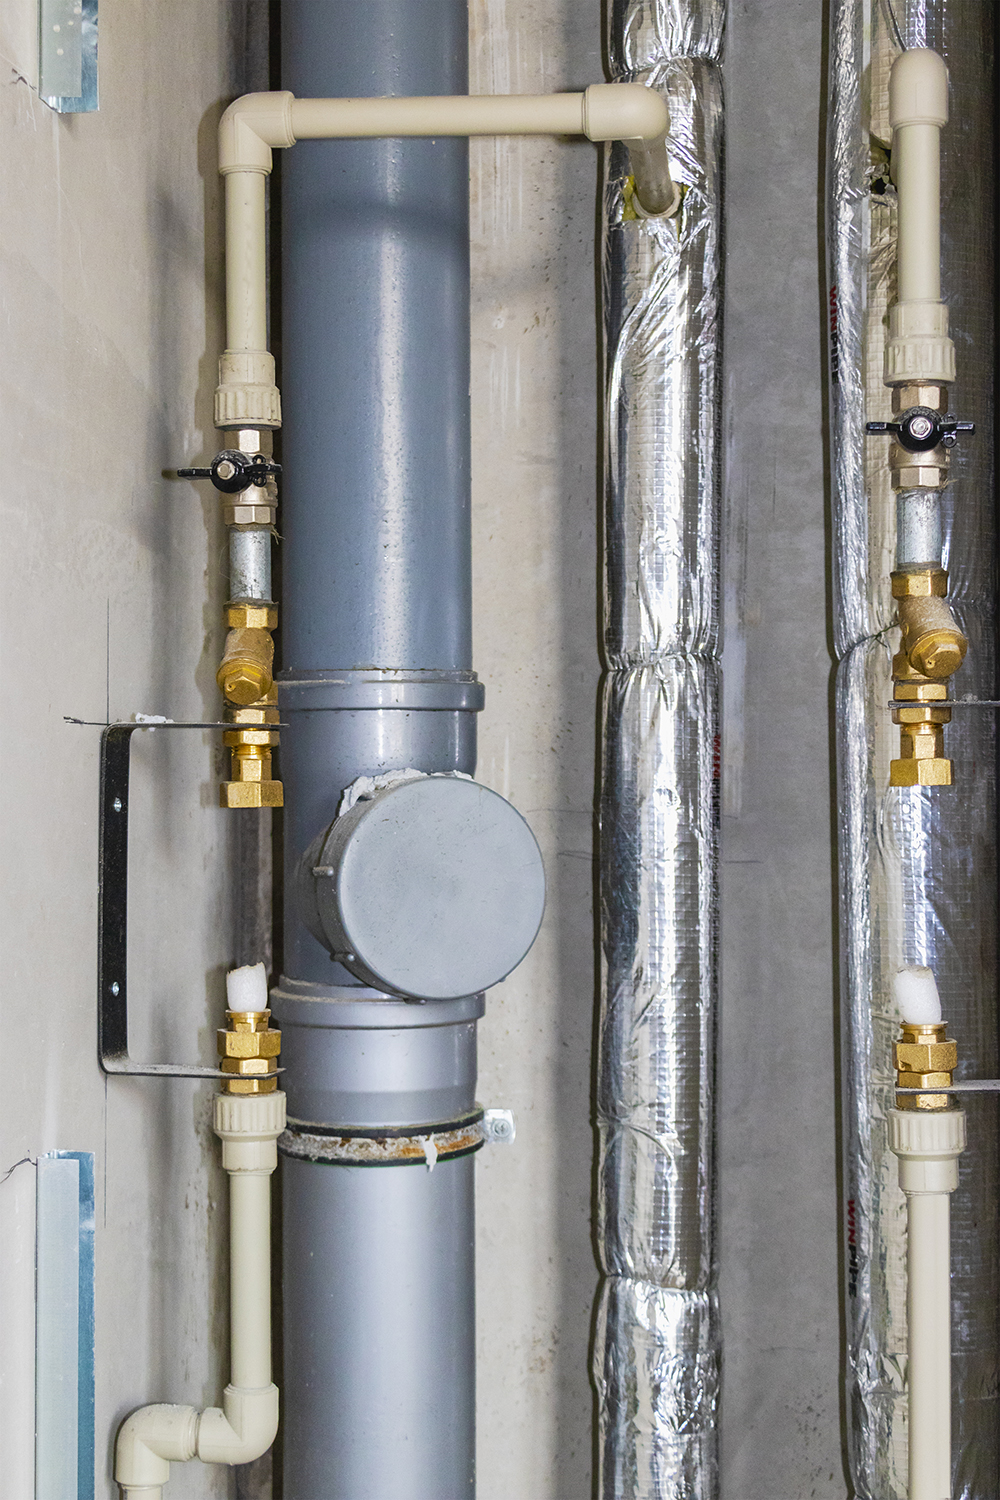 water supply and sewerage installation in a residential building